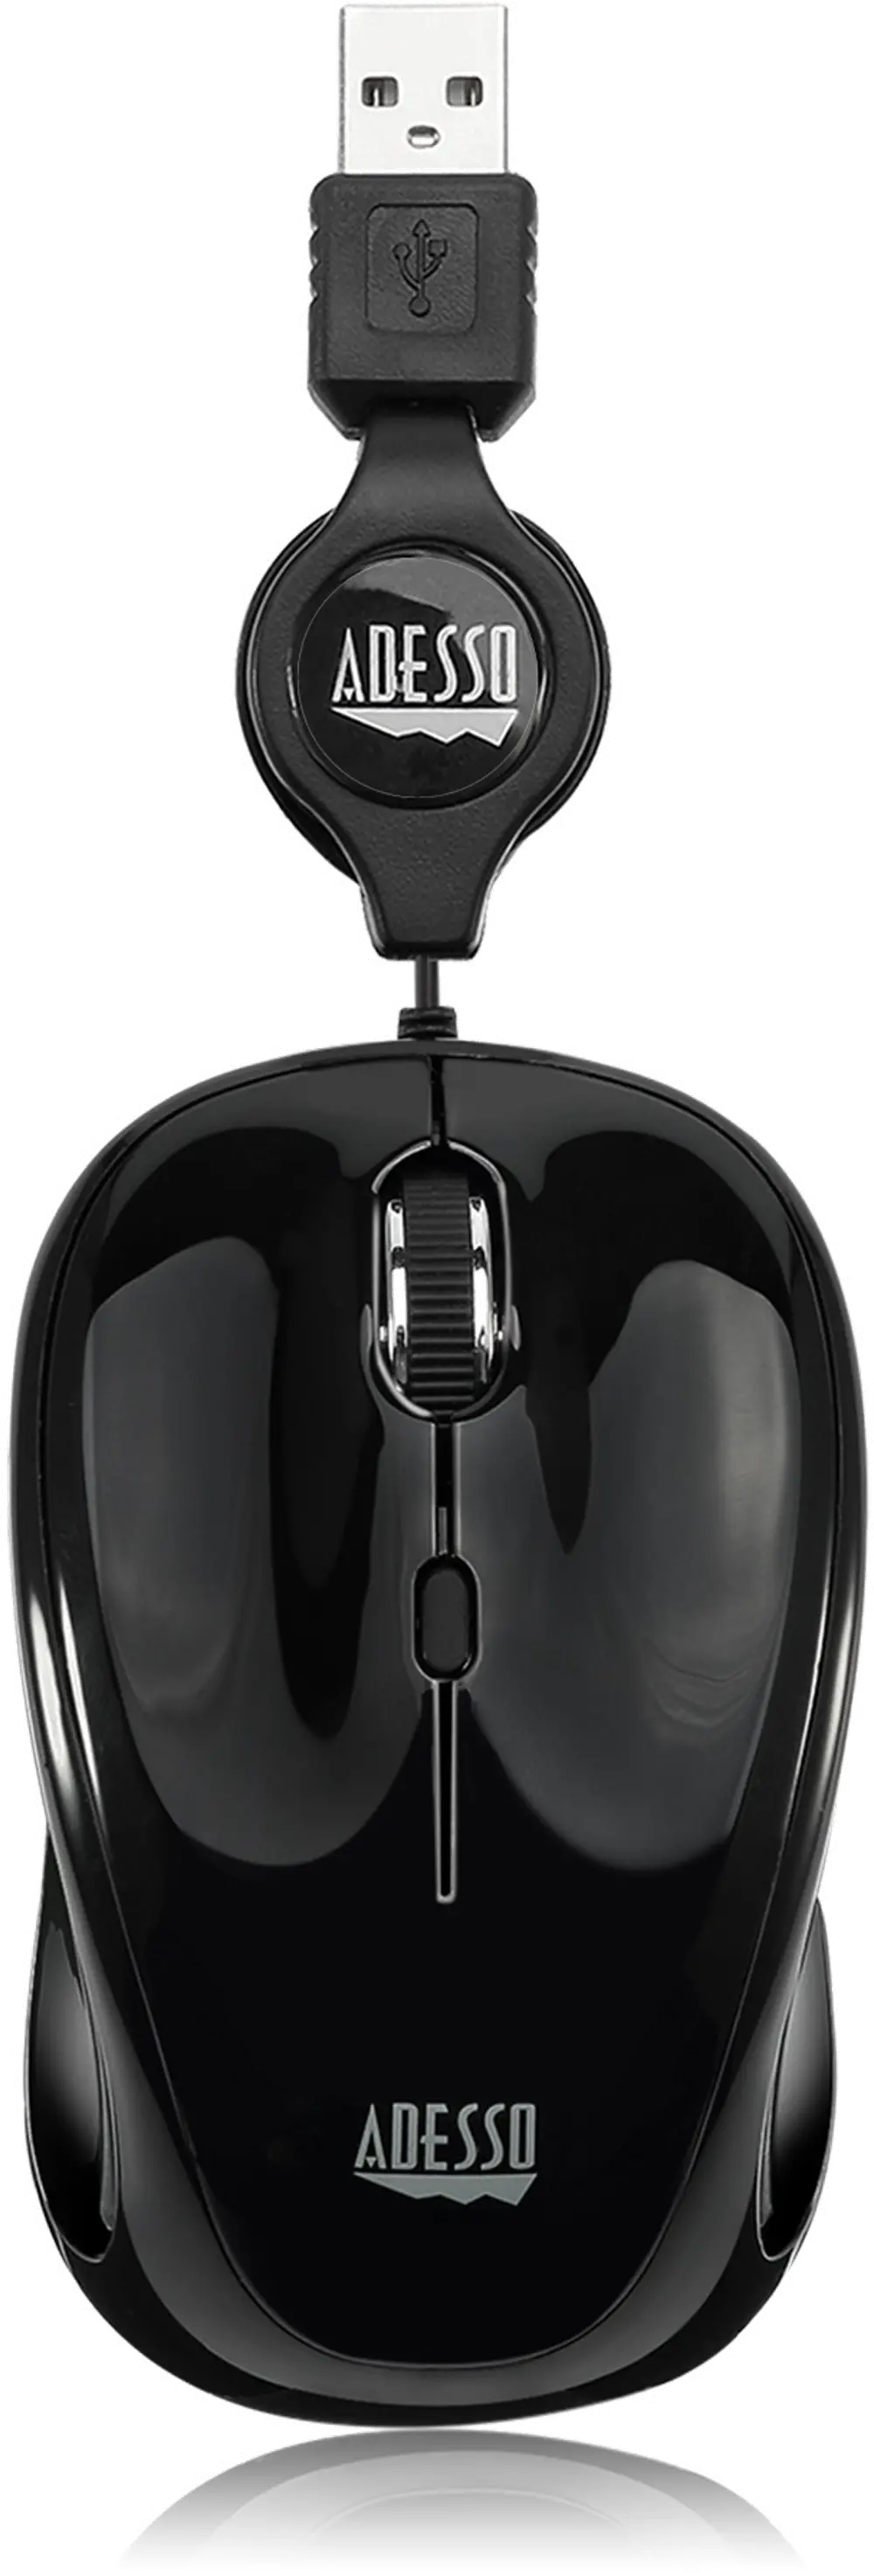 iMOUSE-S8 BLACK Adesso Black USB Illuminated Retractable Mouse - iMouse S8-1